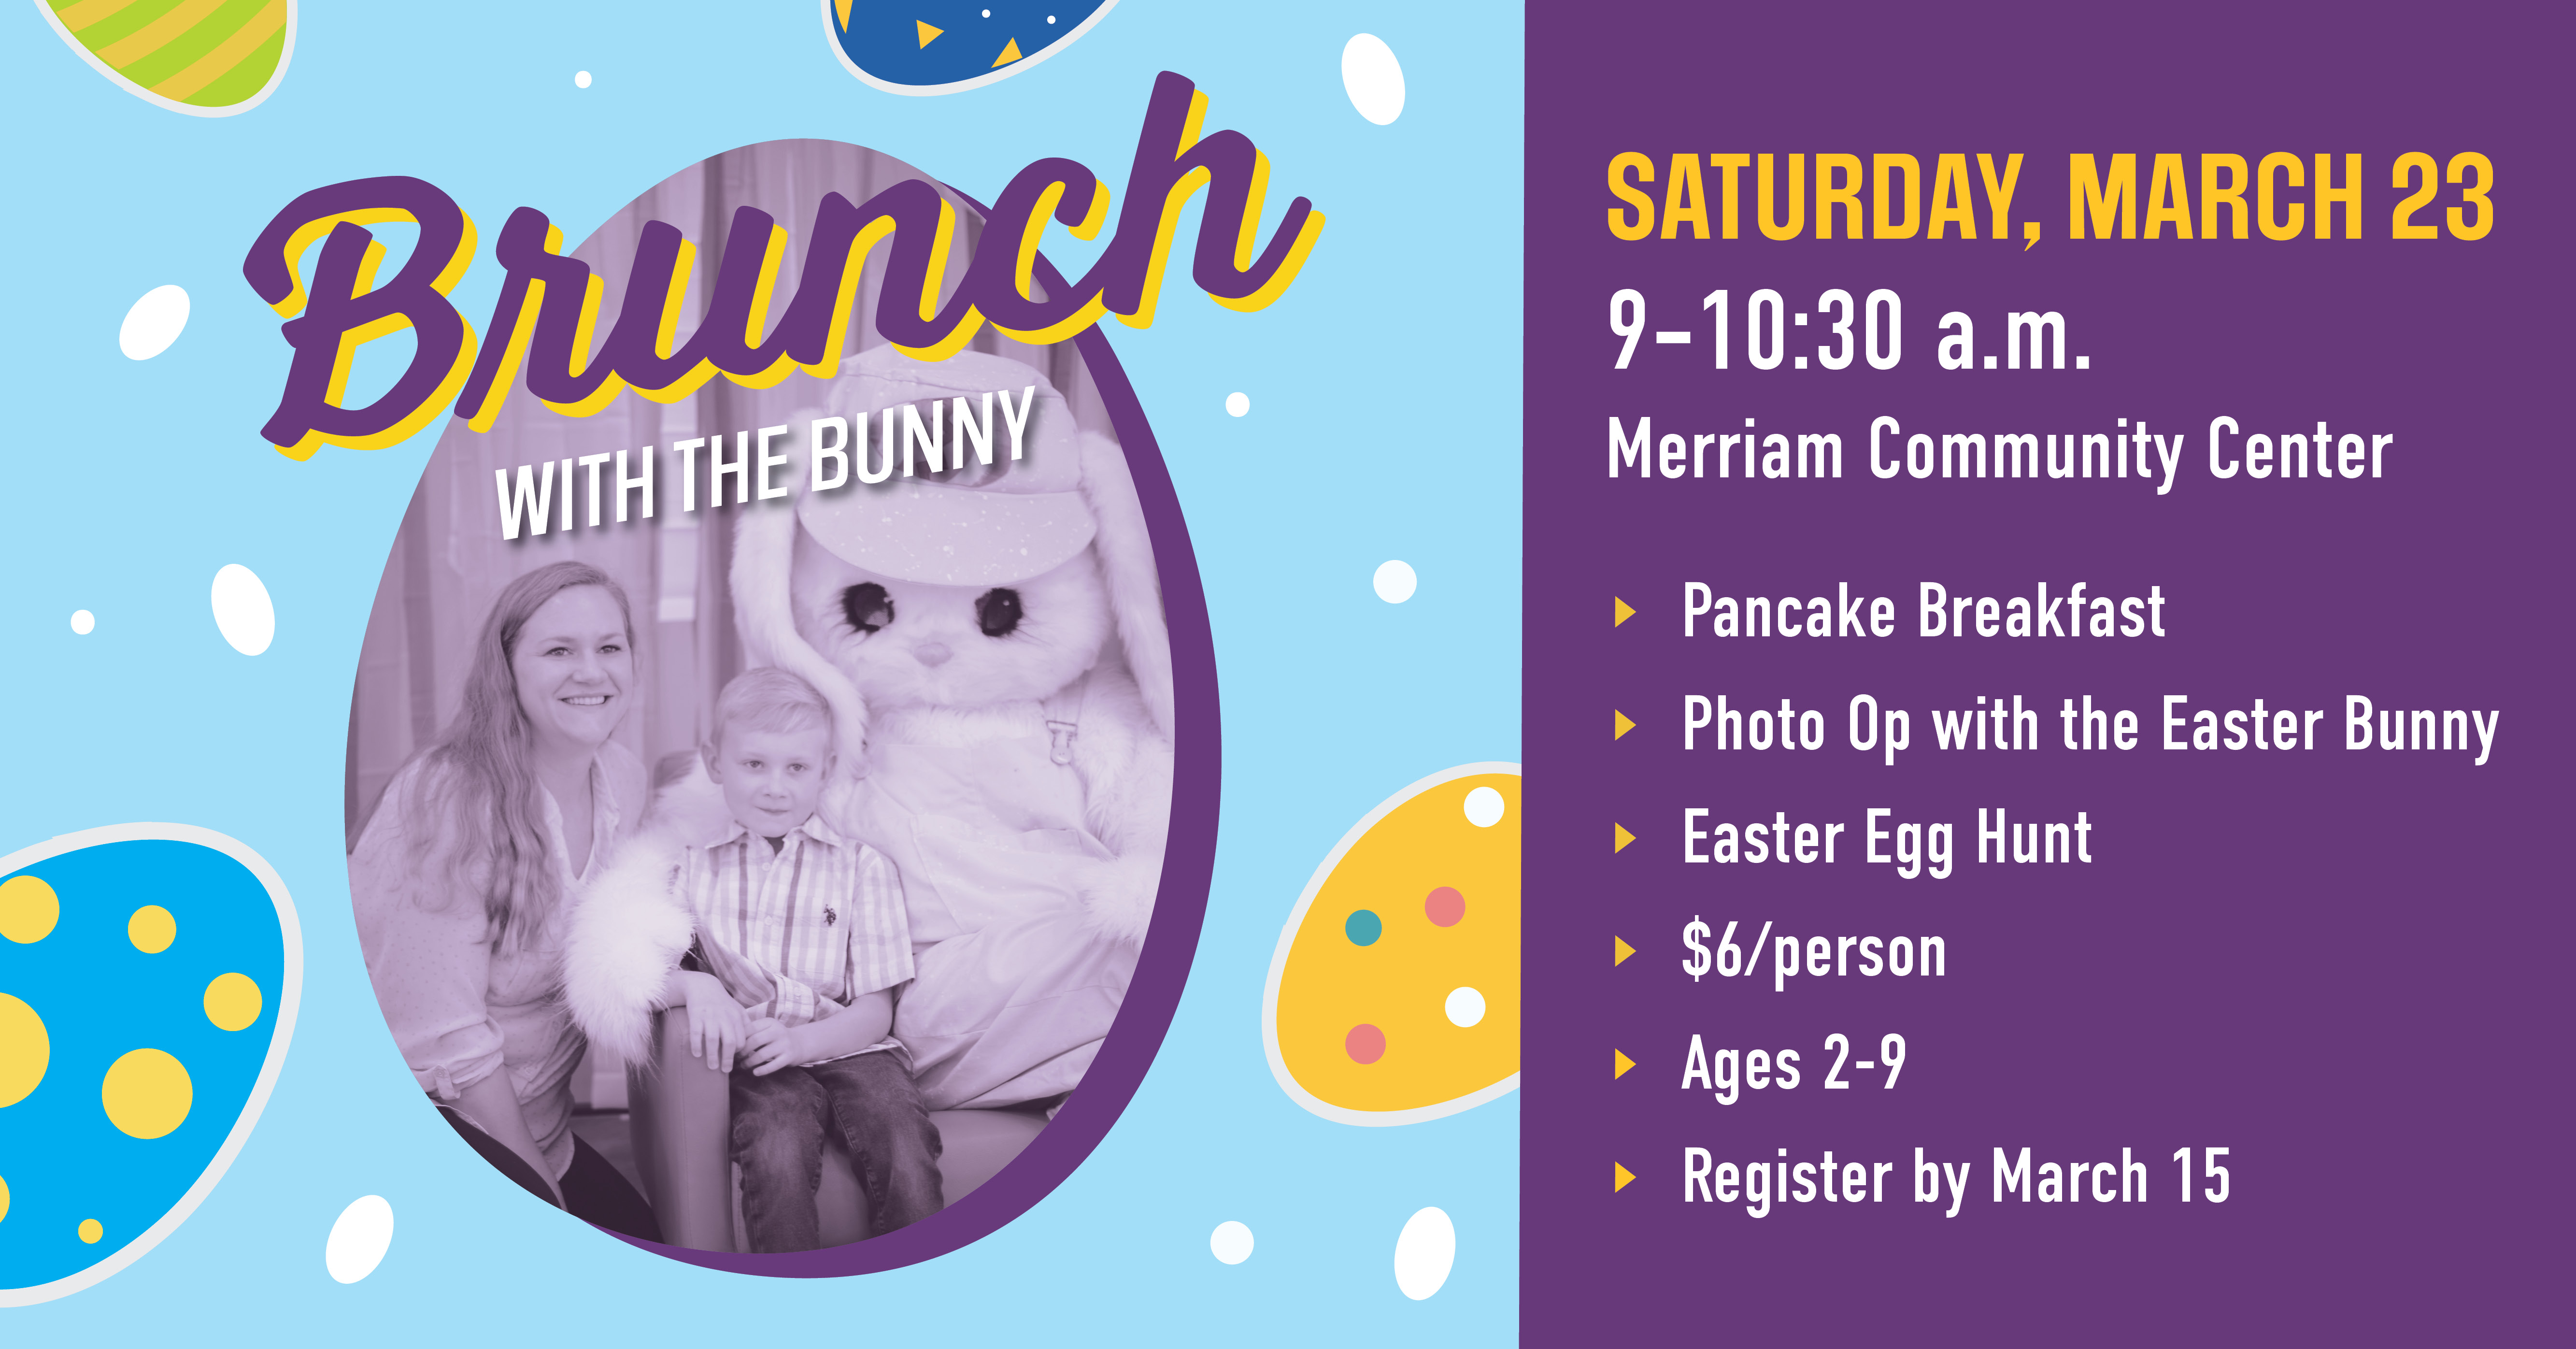 Brunch with Bunny